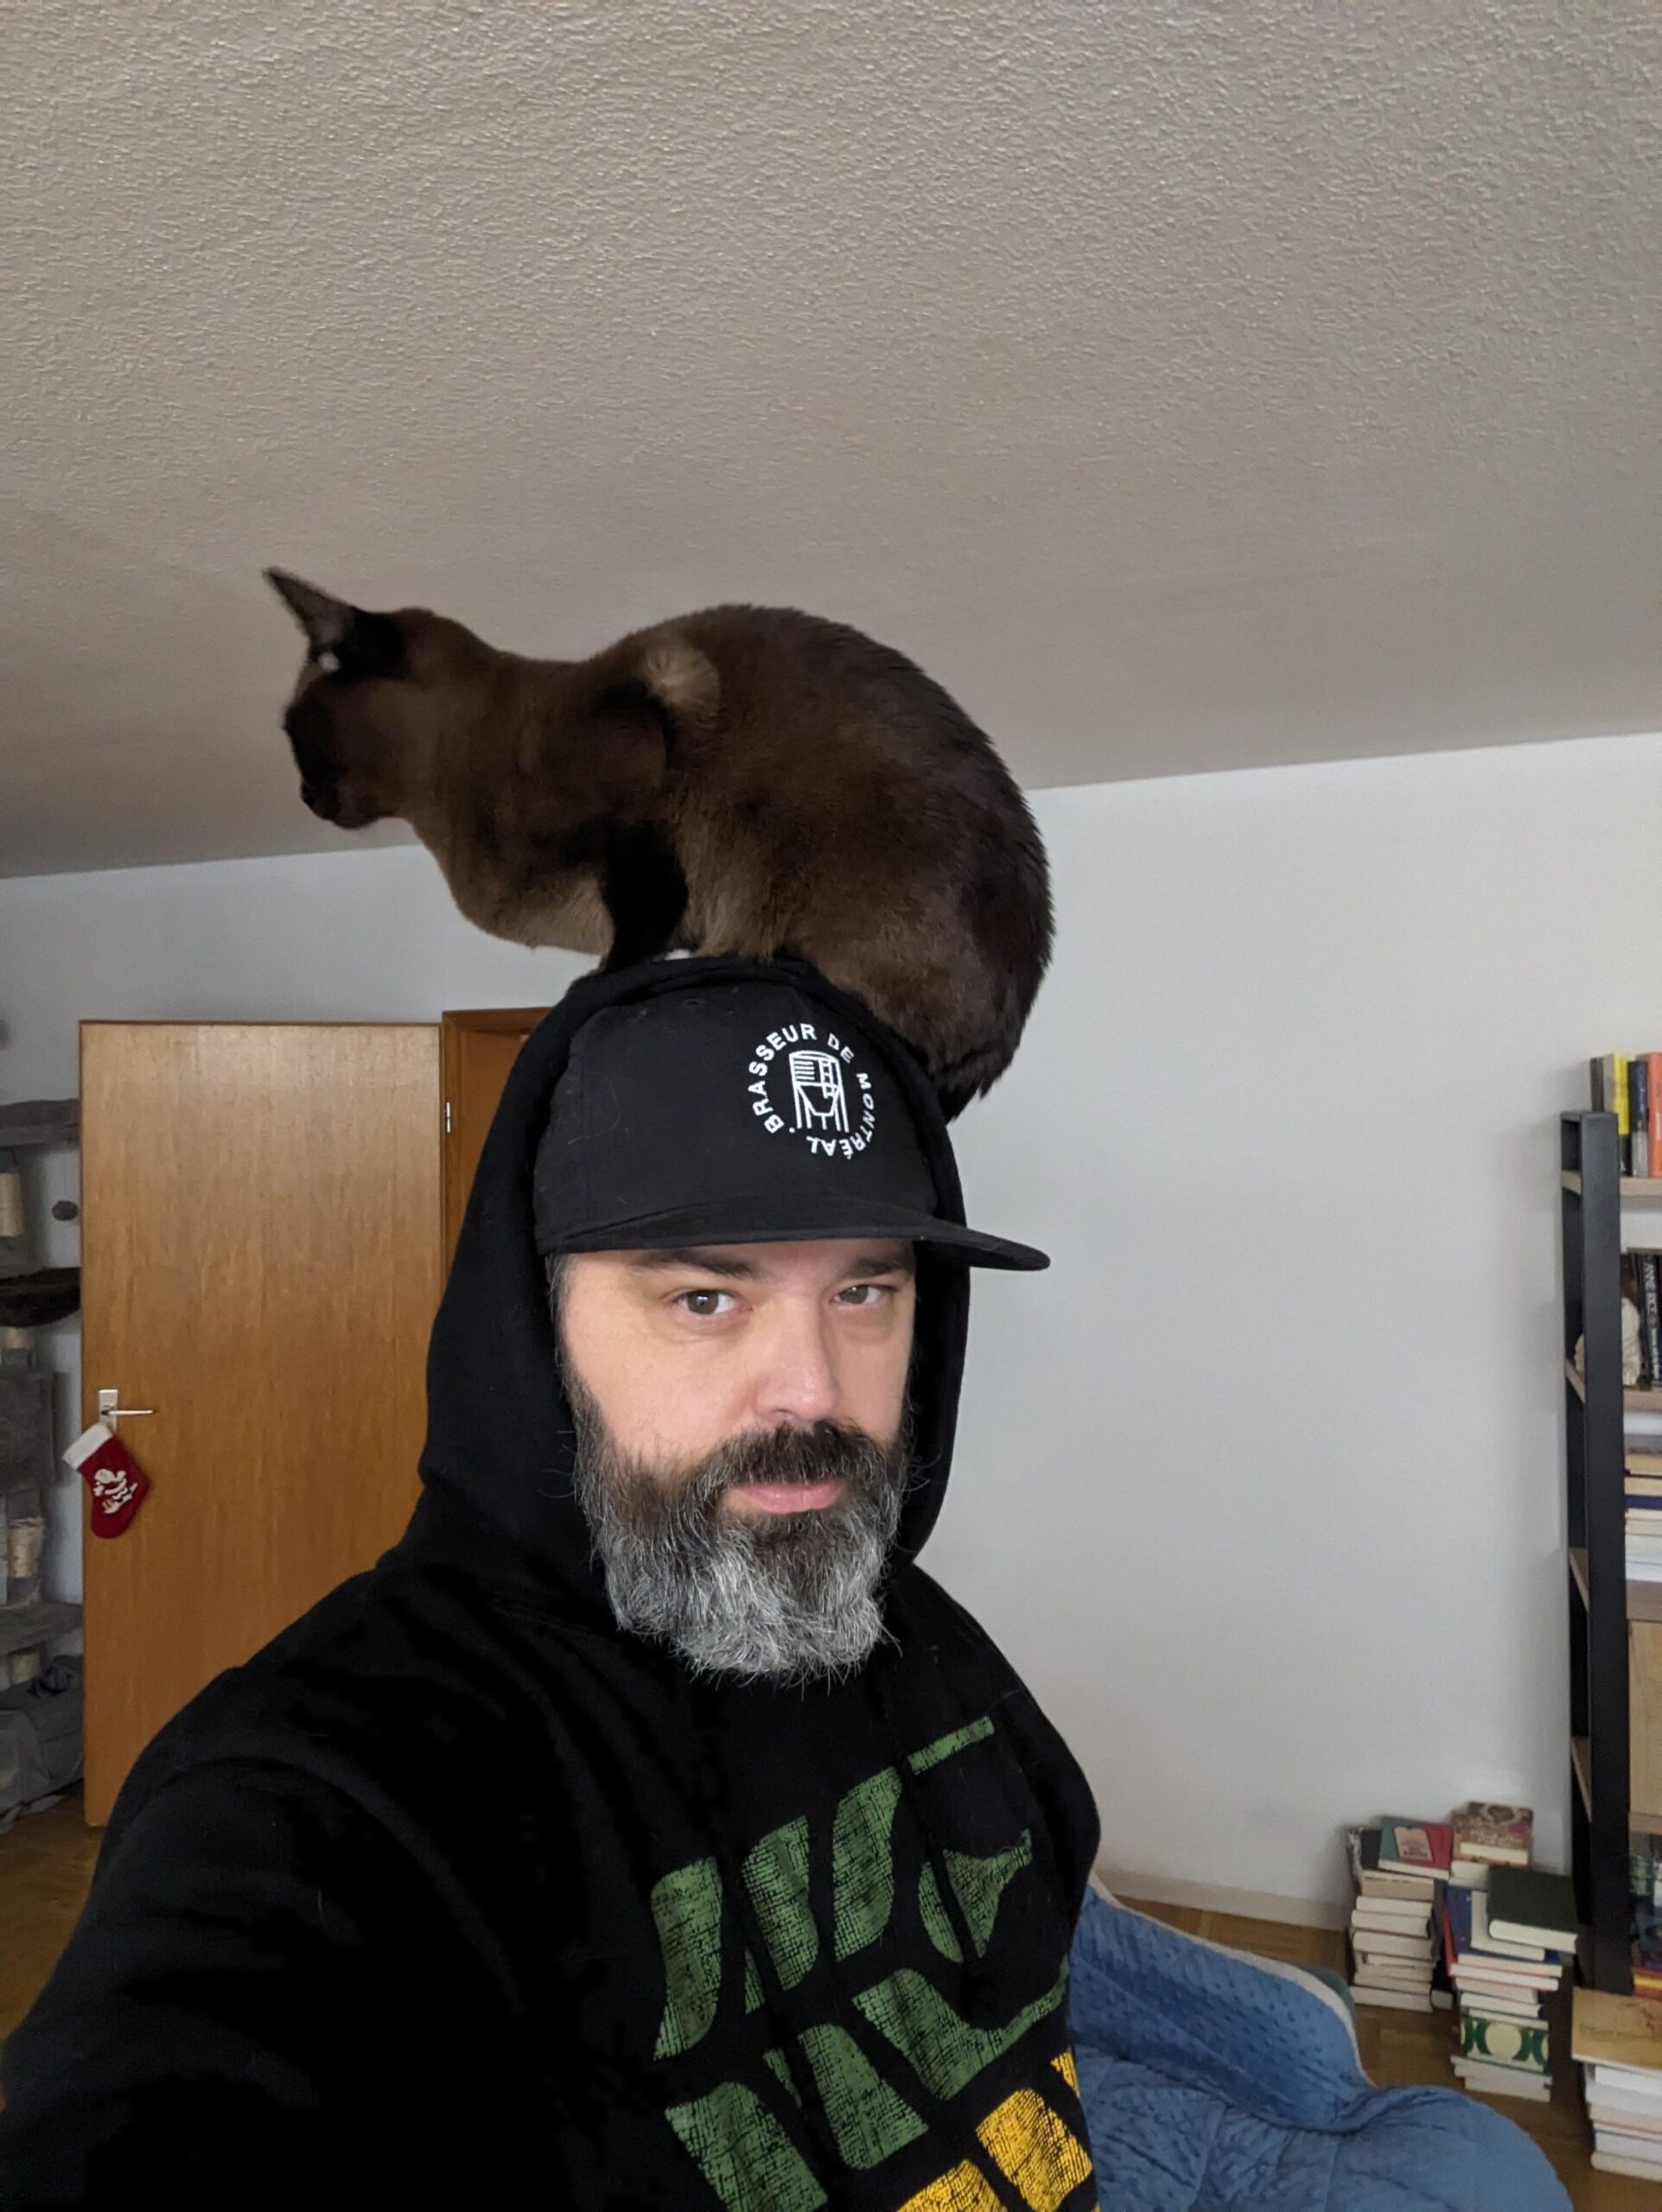 Dude from Saskatchewan, hat from Montreal, cat is Burmese, positioned in Germany.